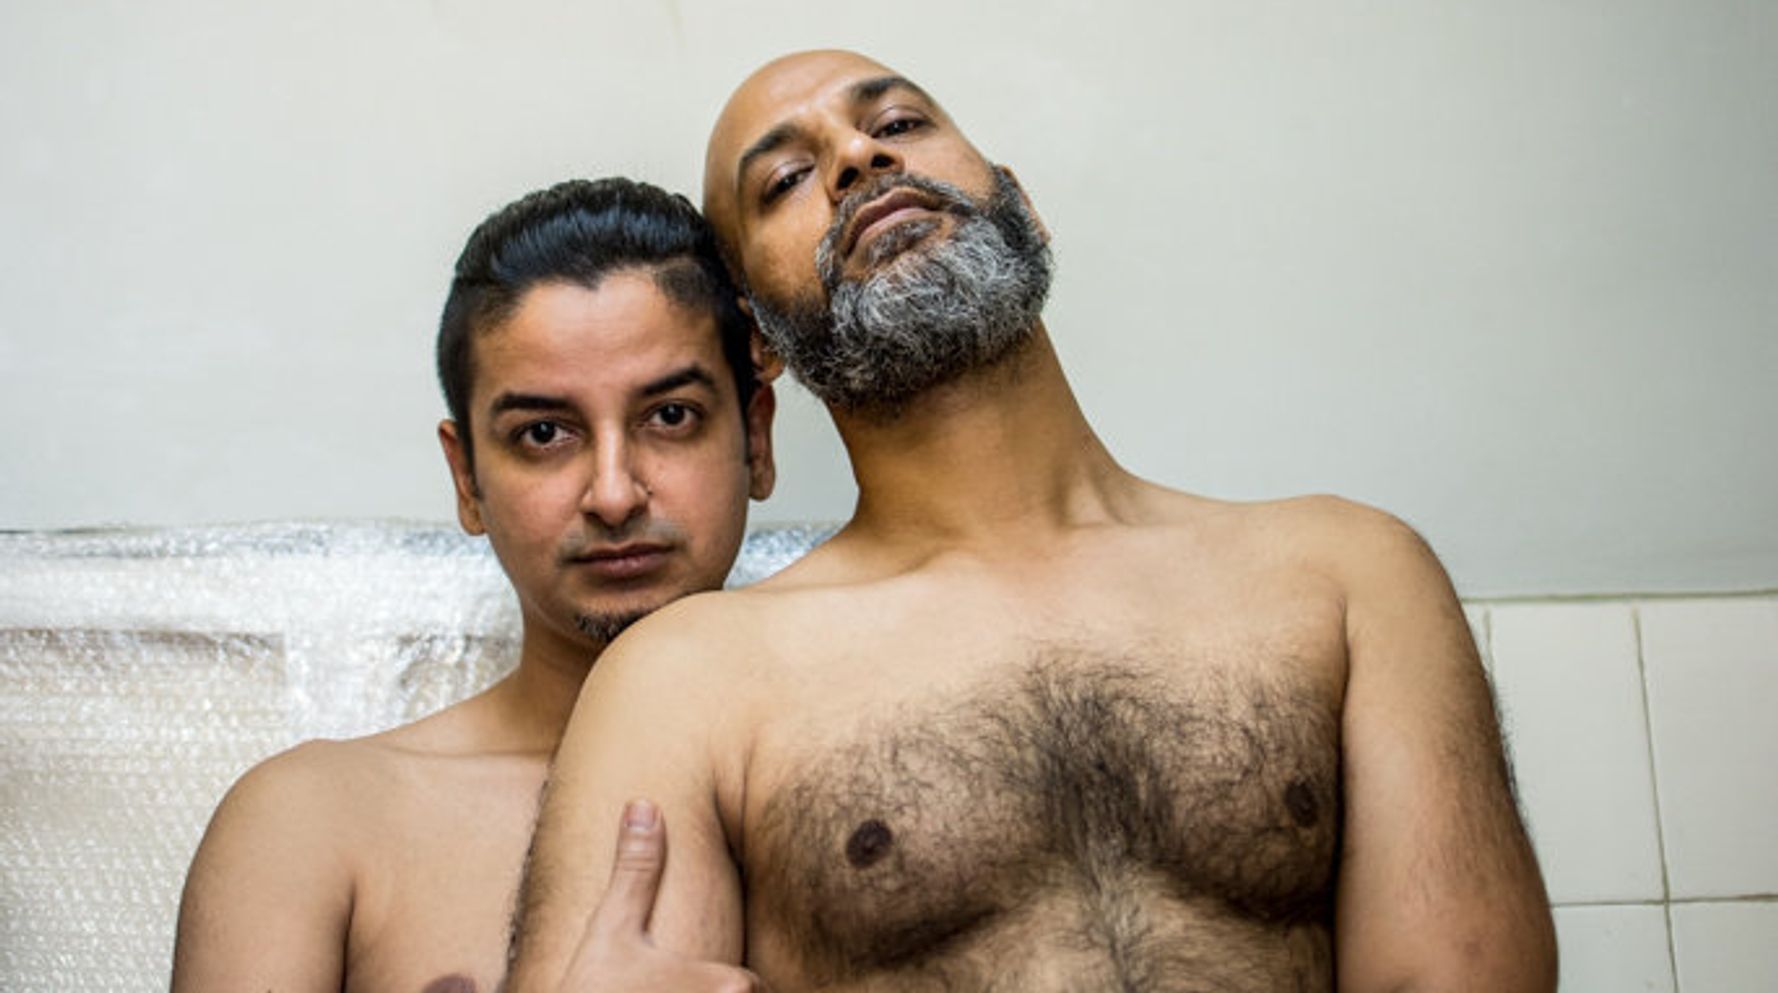 Gay Indian Men Strip Down For Queer Magazine Pictorial.